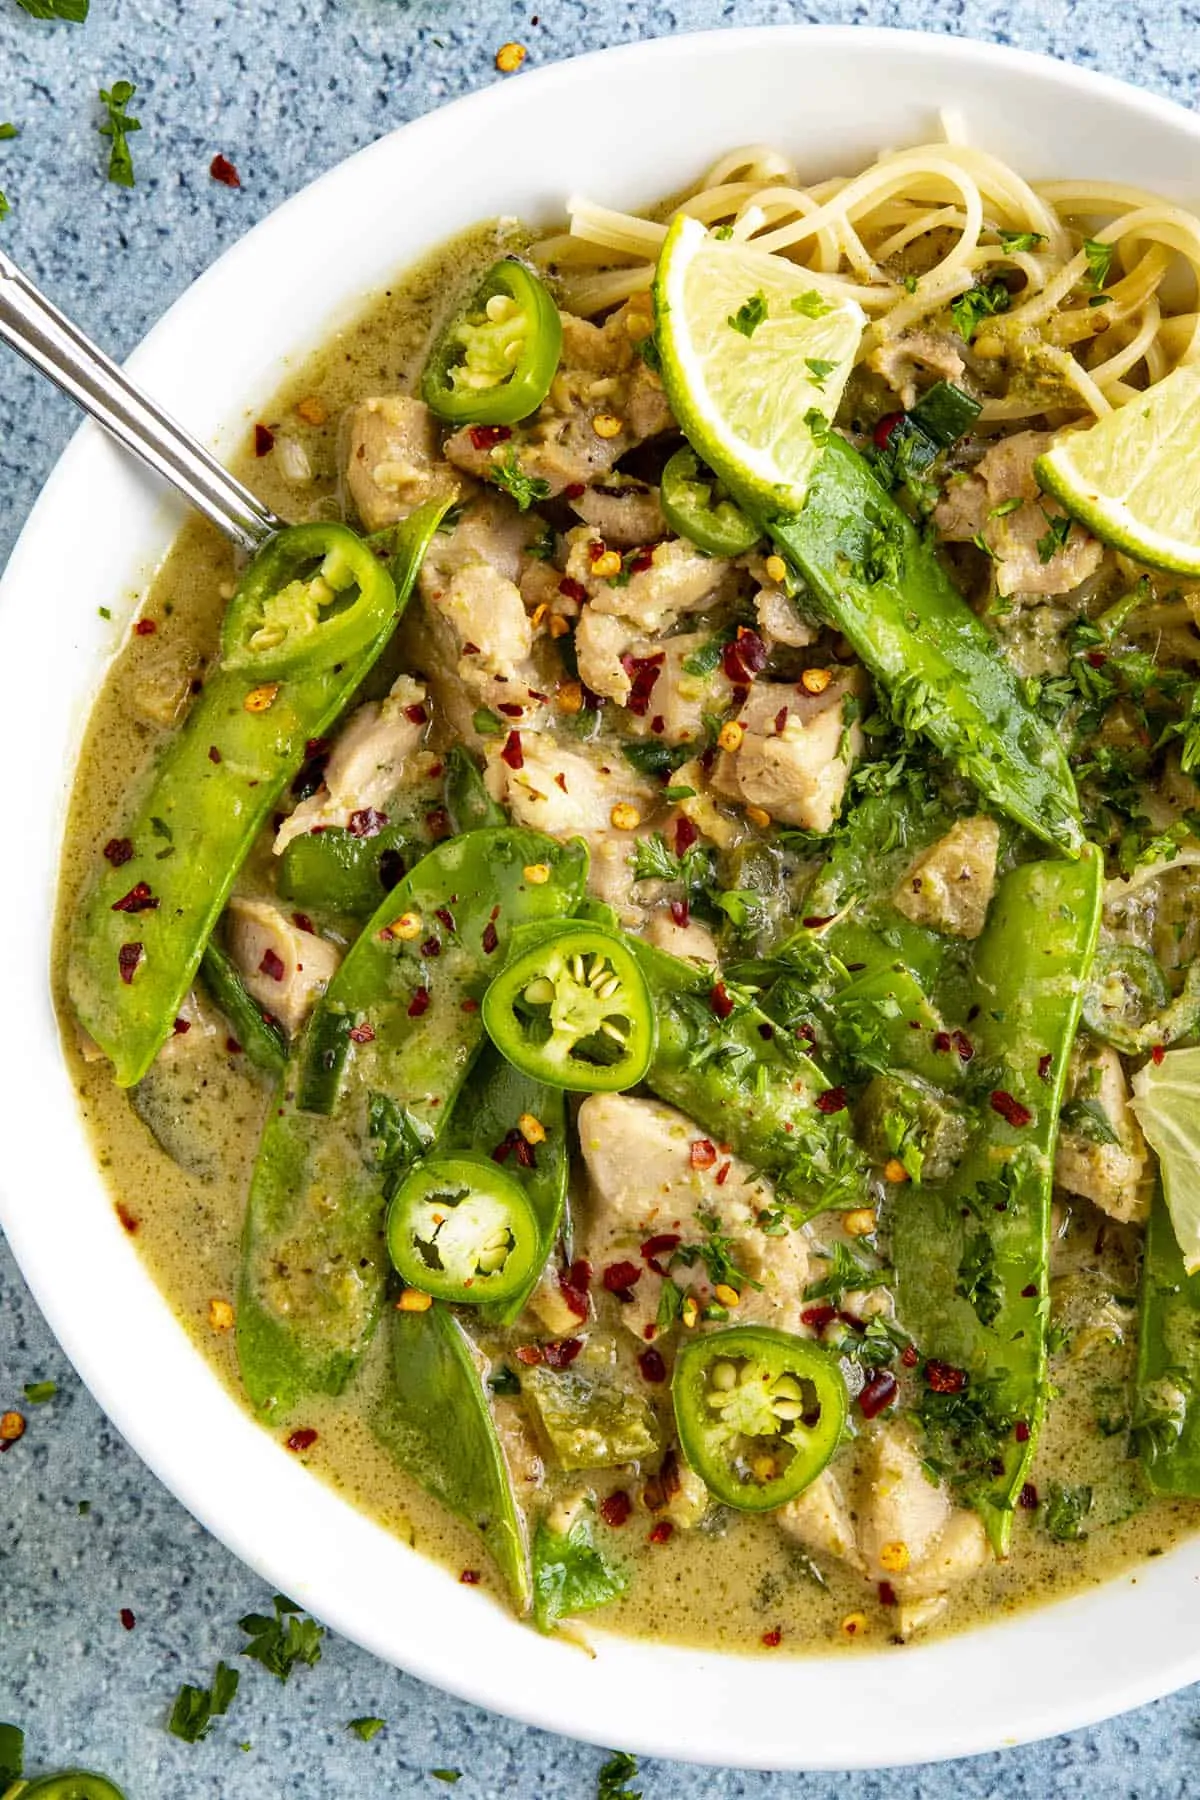 Spicy green curry in a bowl, ready to serve